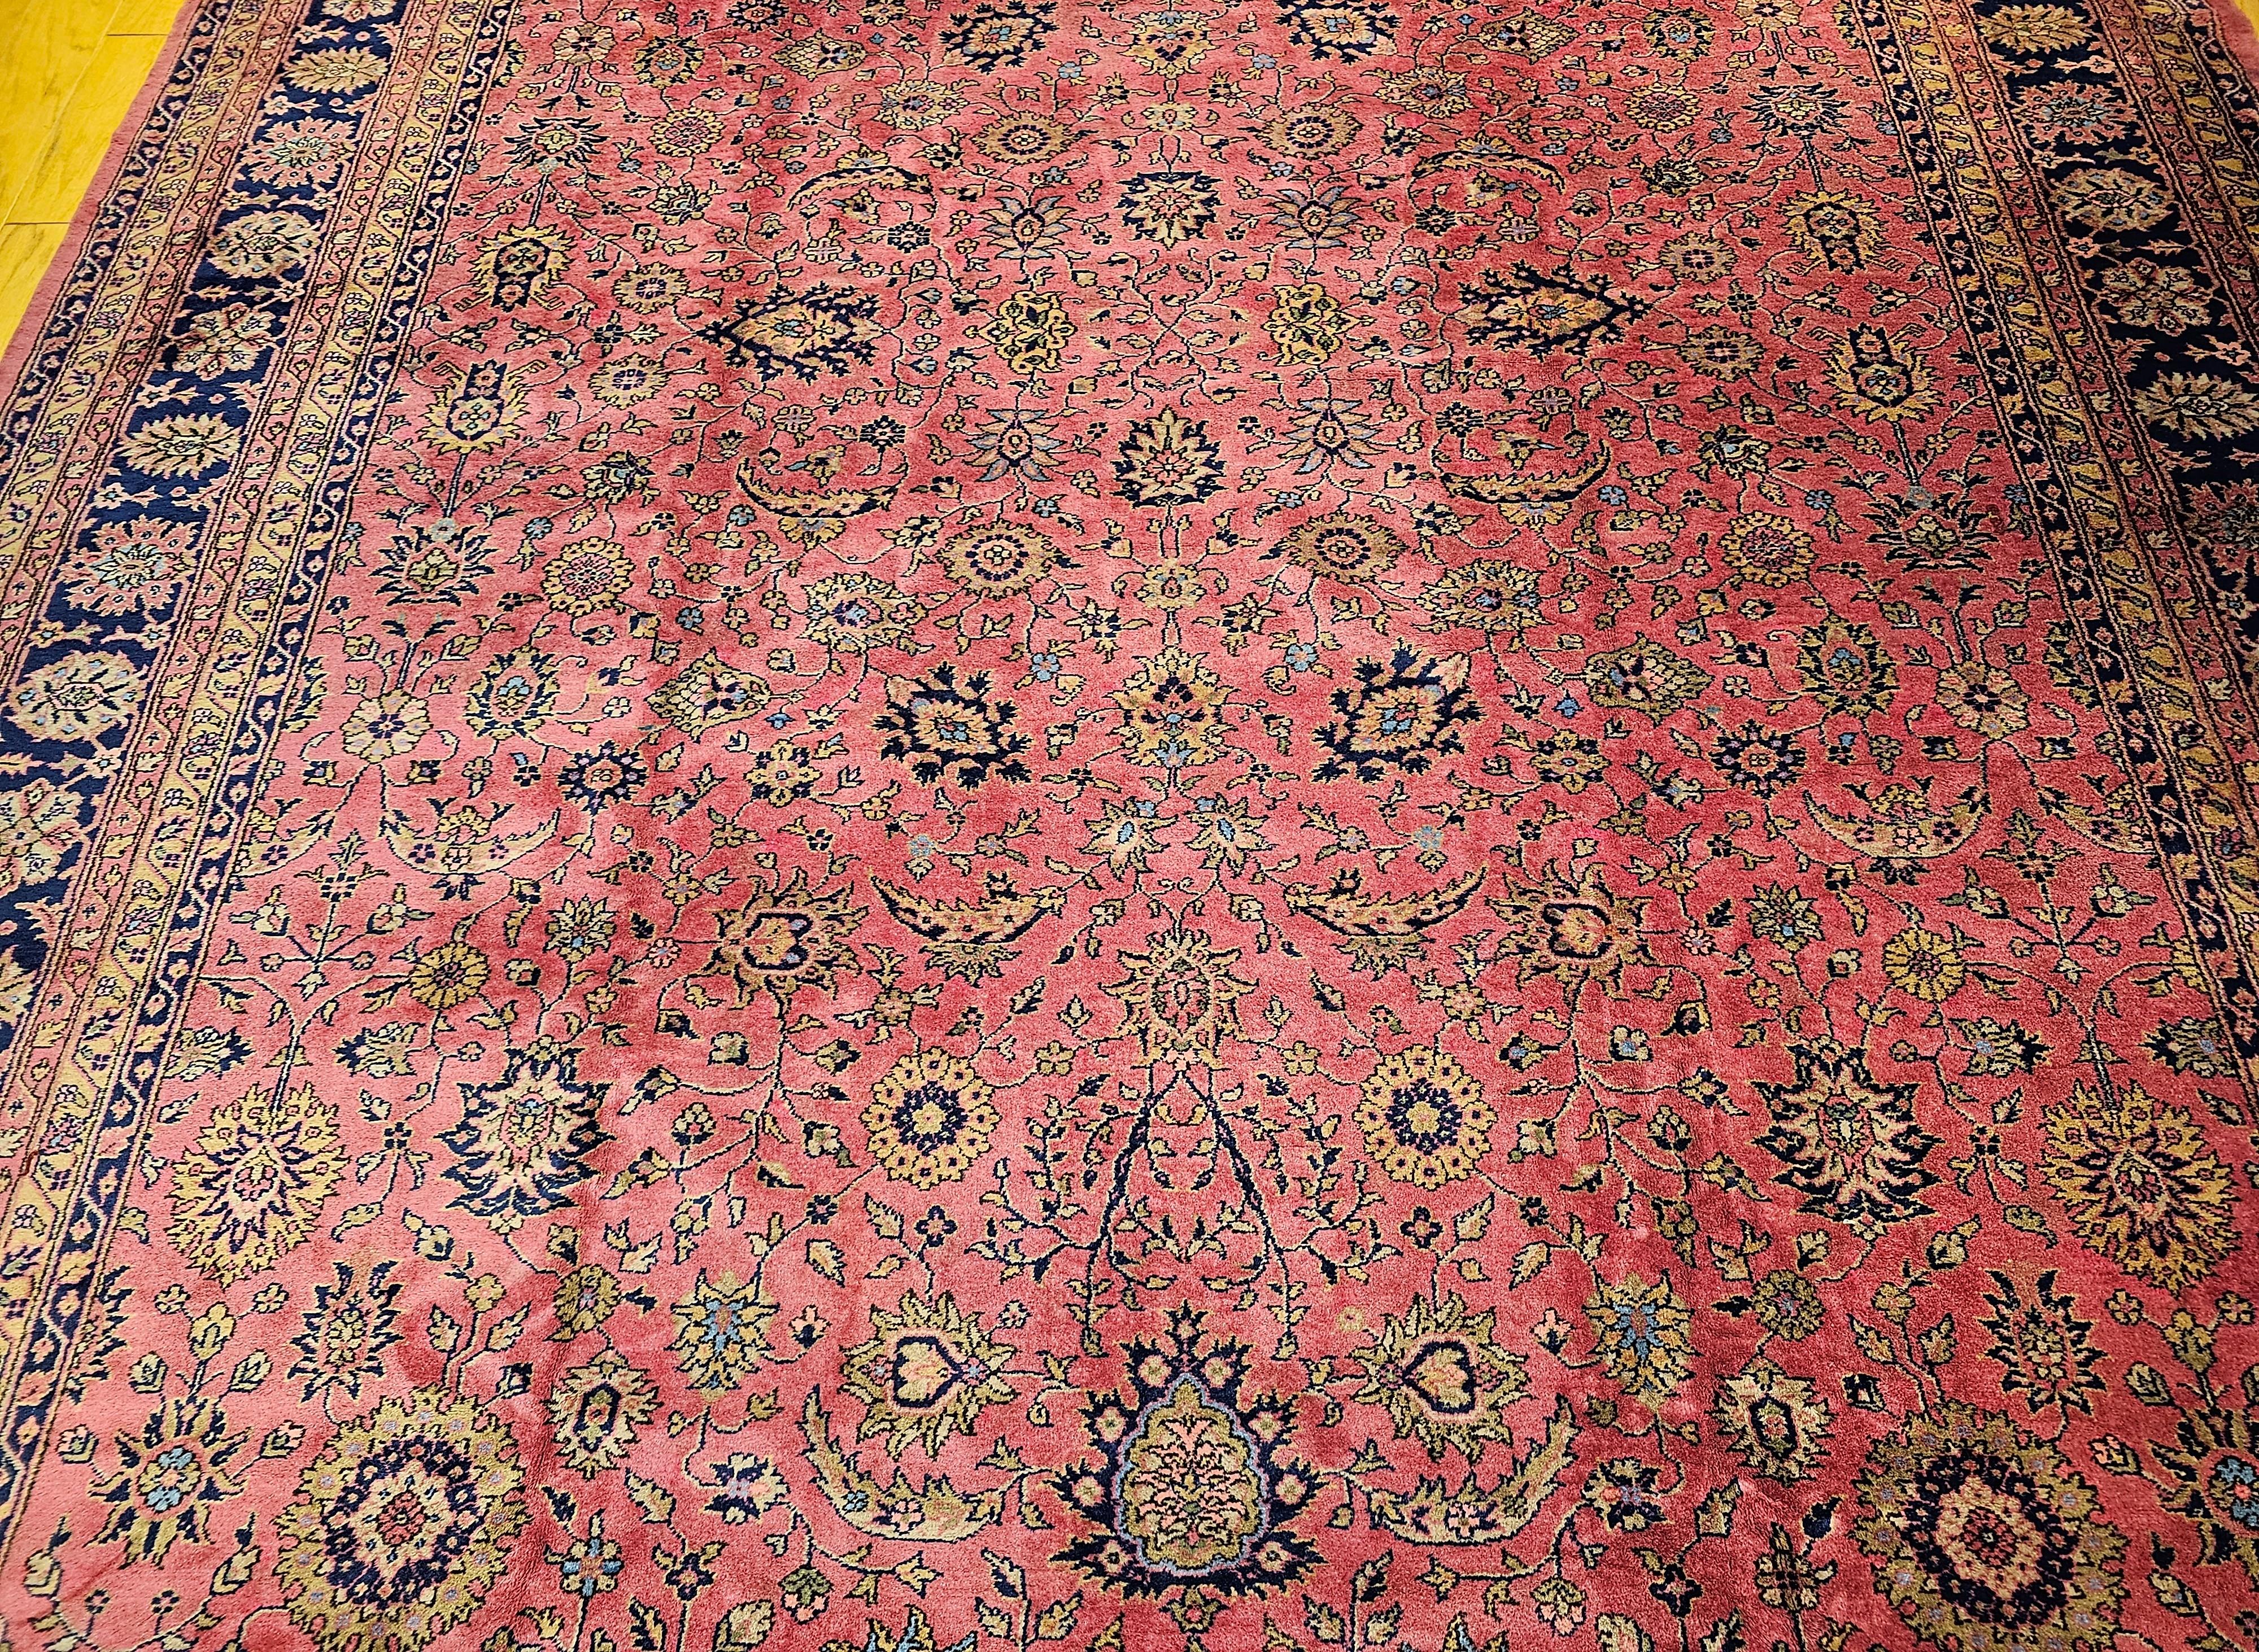 Vintage Oversize Turkish Rug in Allover Geometric Pattern in Pale Pink, Navy In Good Condition For Sale In Barrington, IL